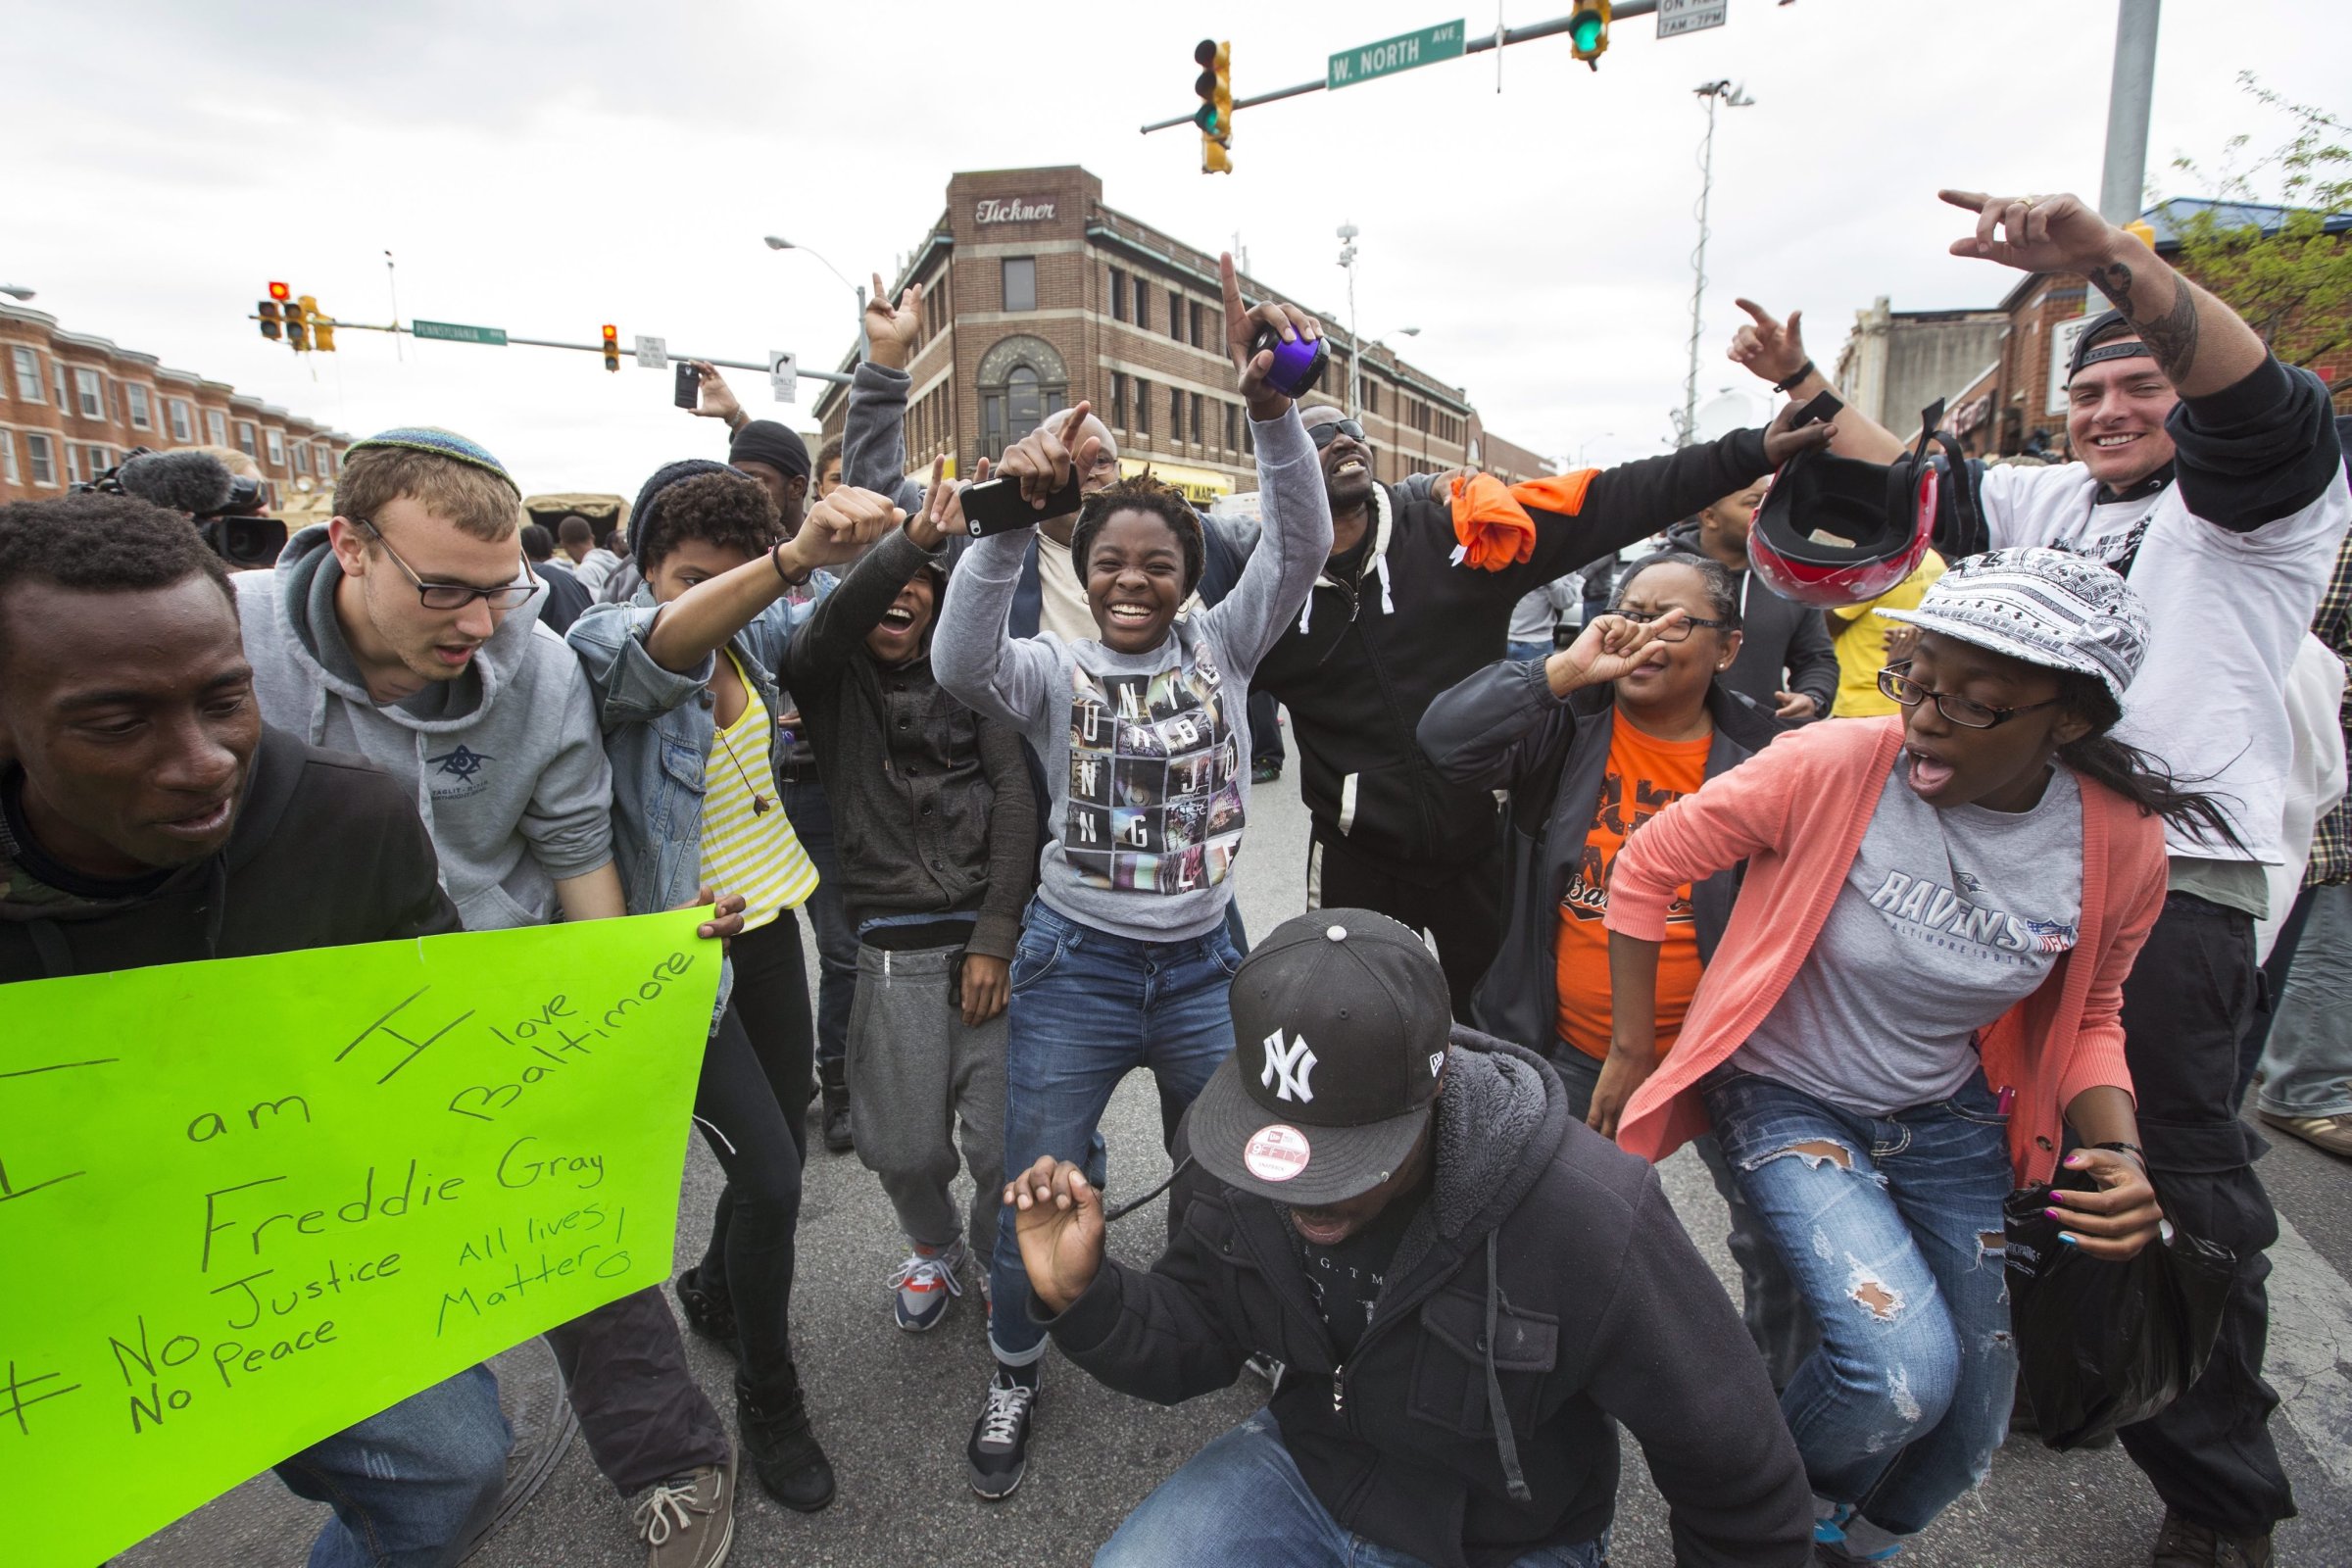 People celebrate in the streets of the Sandtown neighborhood in Baltimore after State Attorney Marilyn Mosby announced that six police officers are being charged in the death of Freddie Gray, in Baltimore on May 1, 2015.